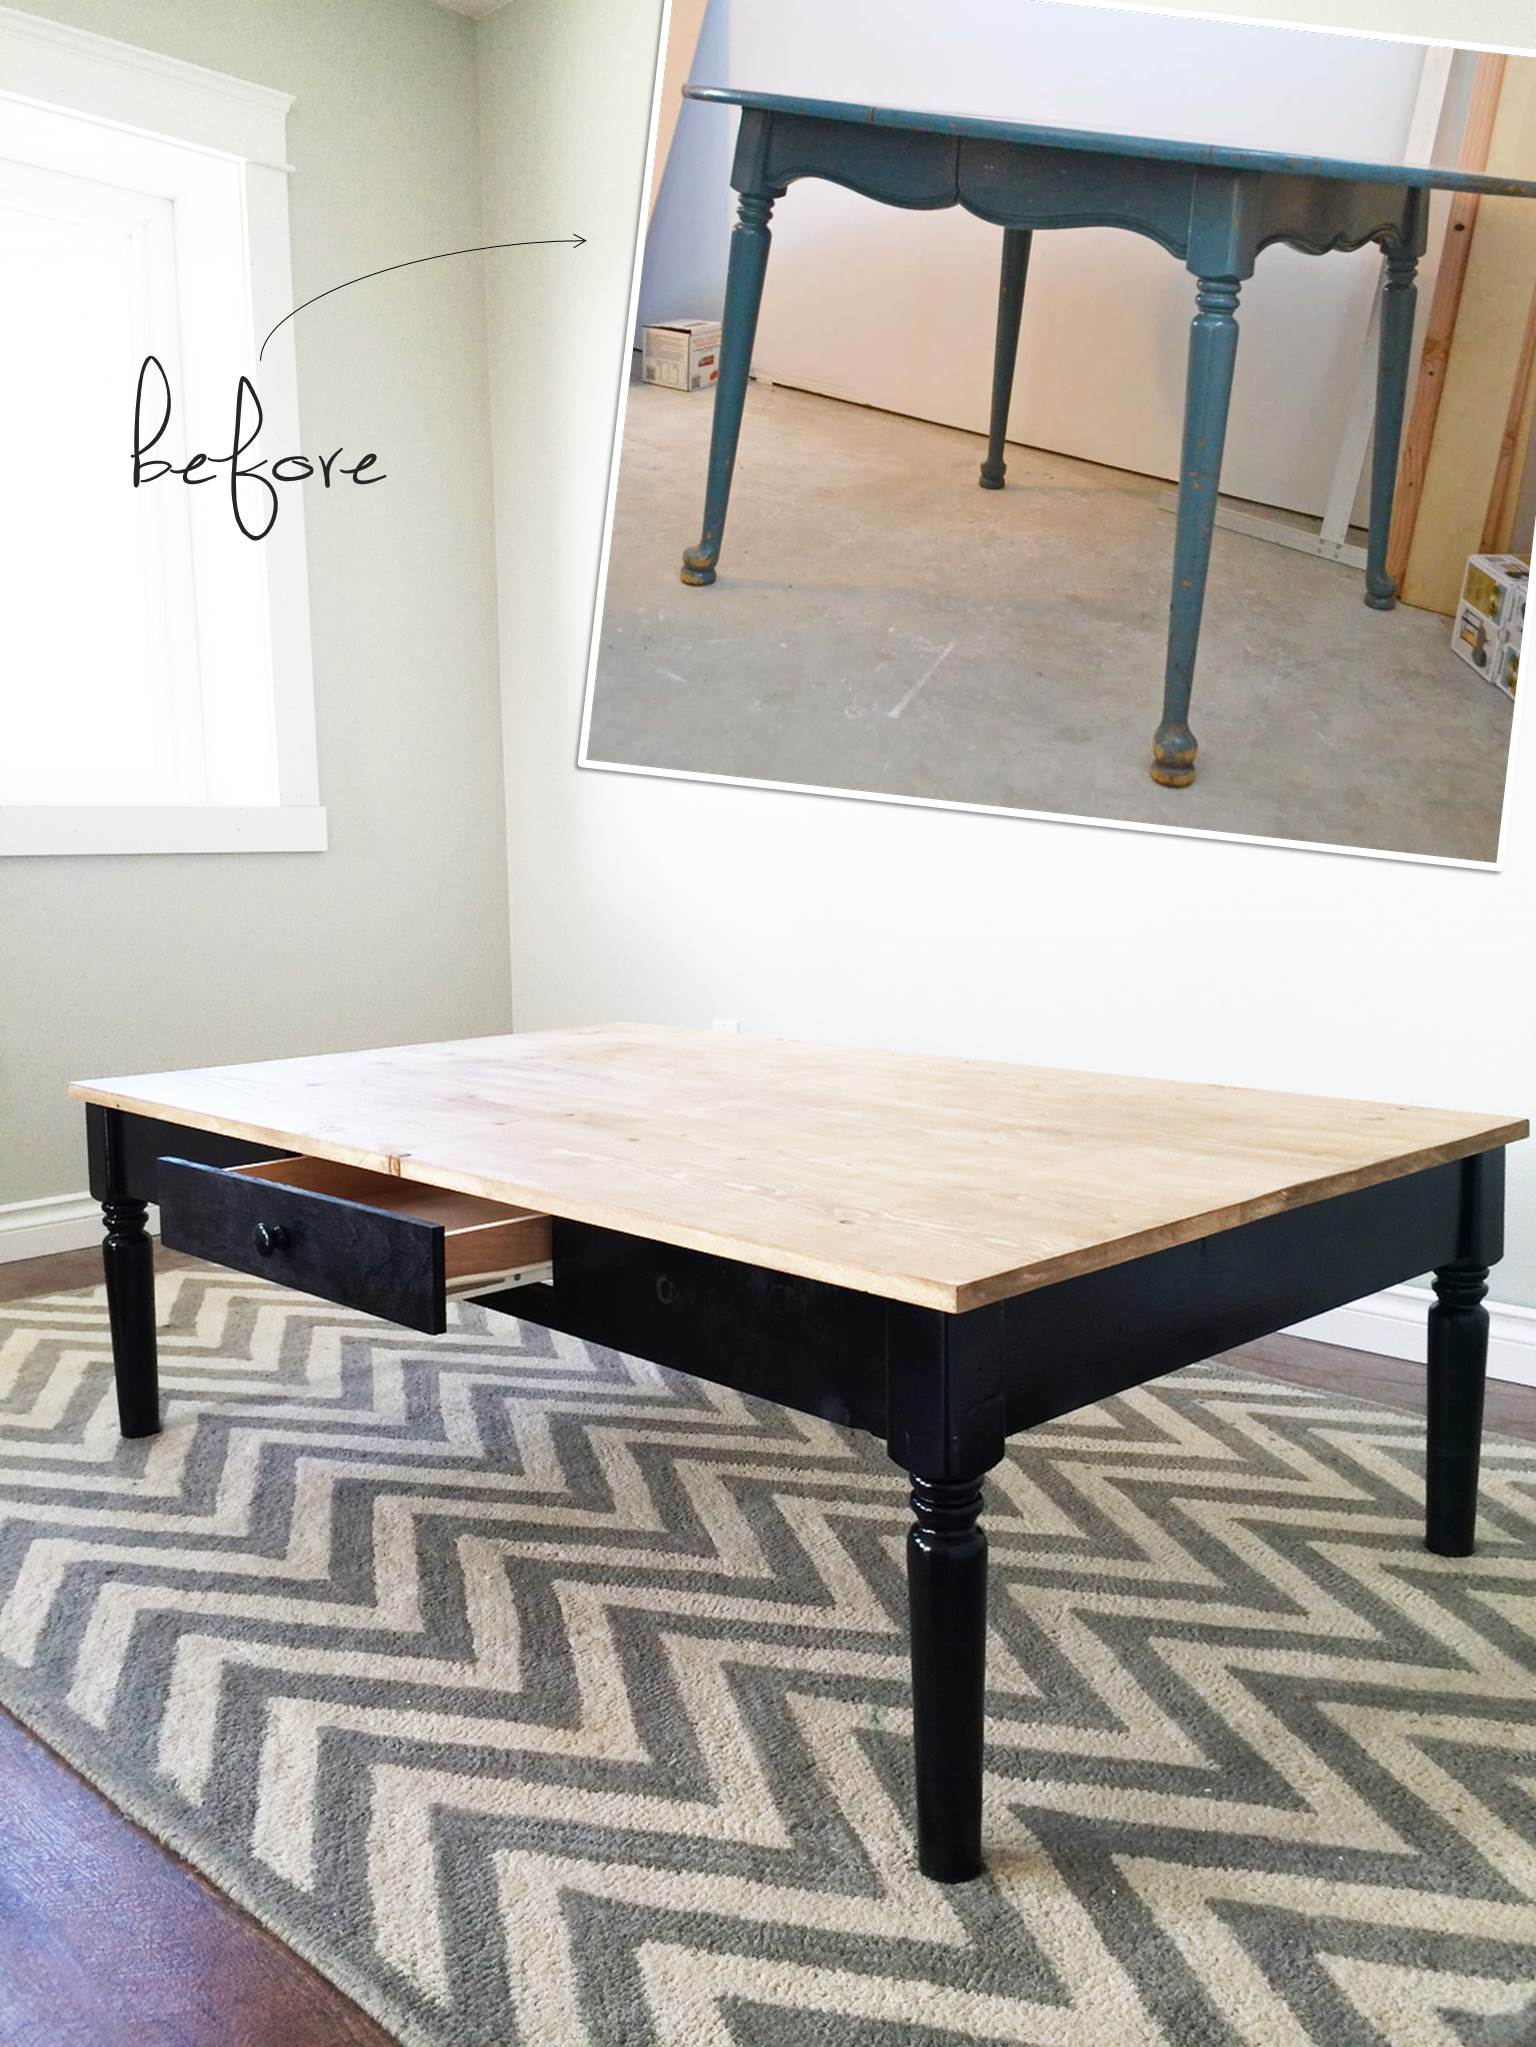 Ana White Turned Leg Coffee Table With Apron Drawer Diy Projects throughout proportions 1536 X 2047